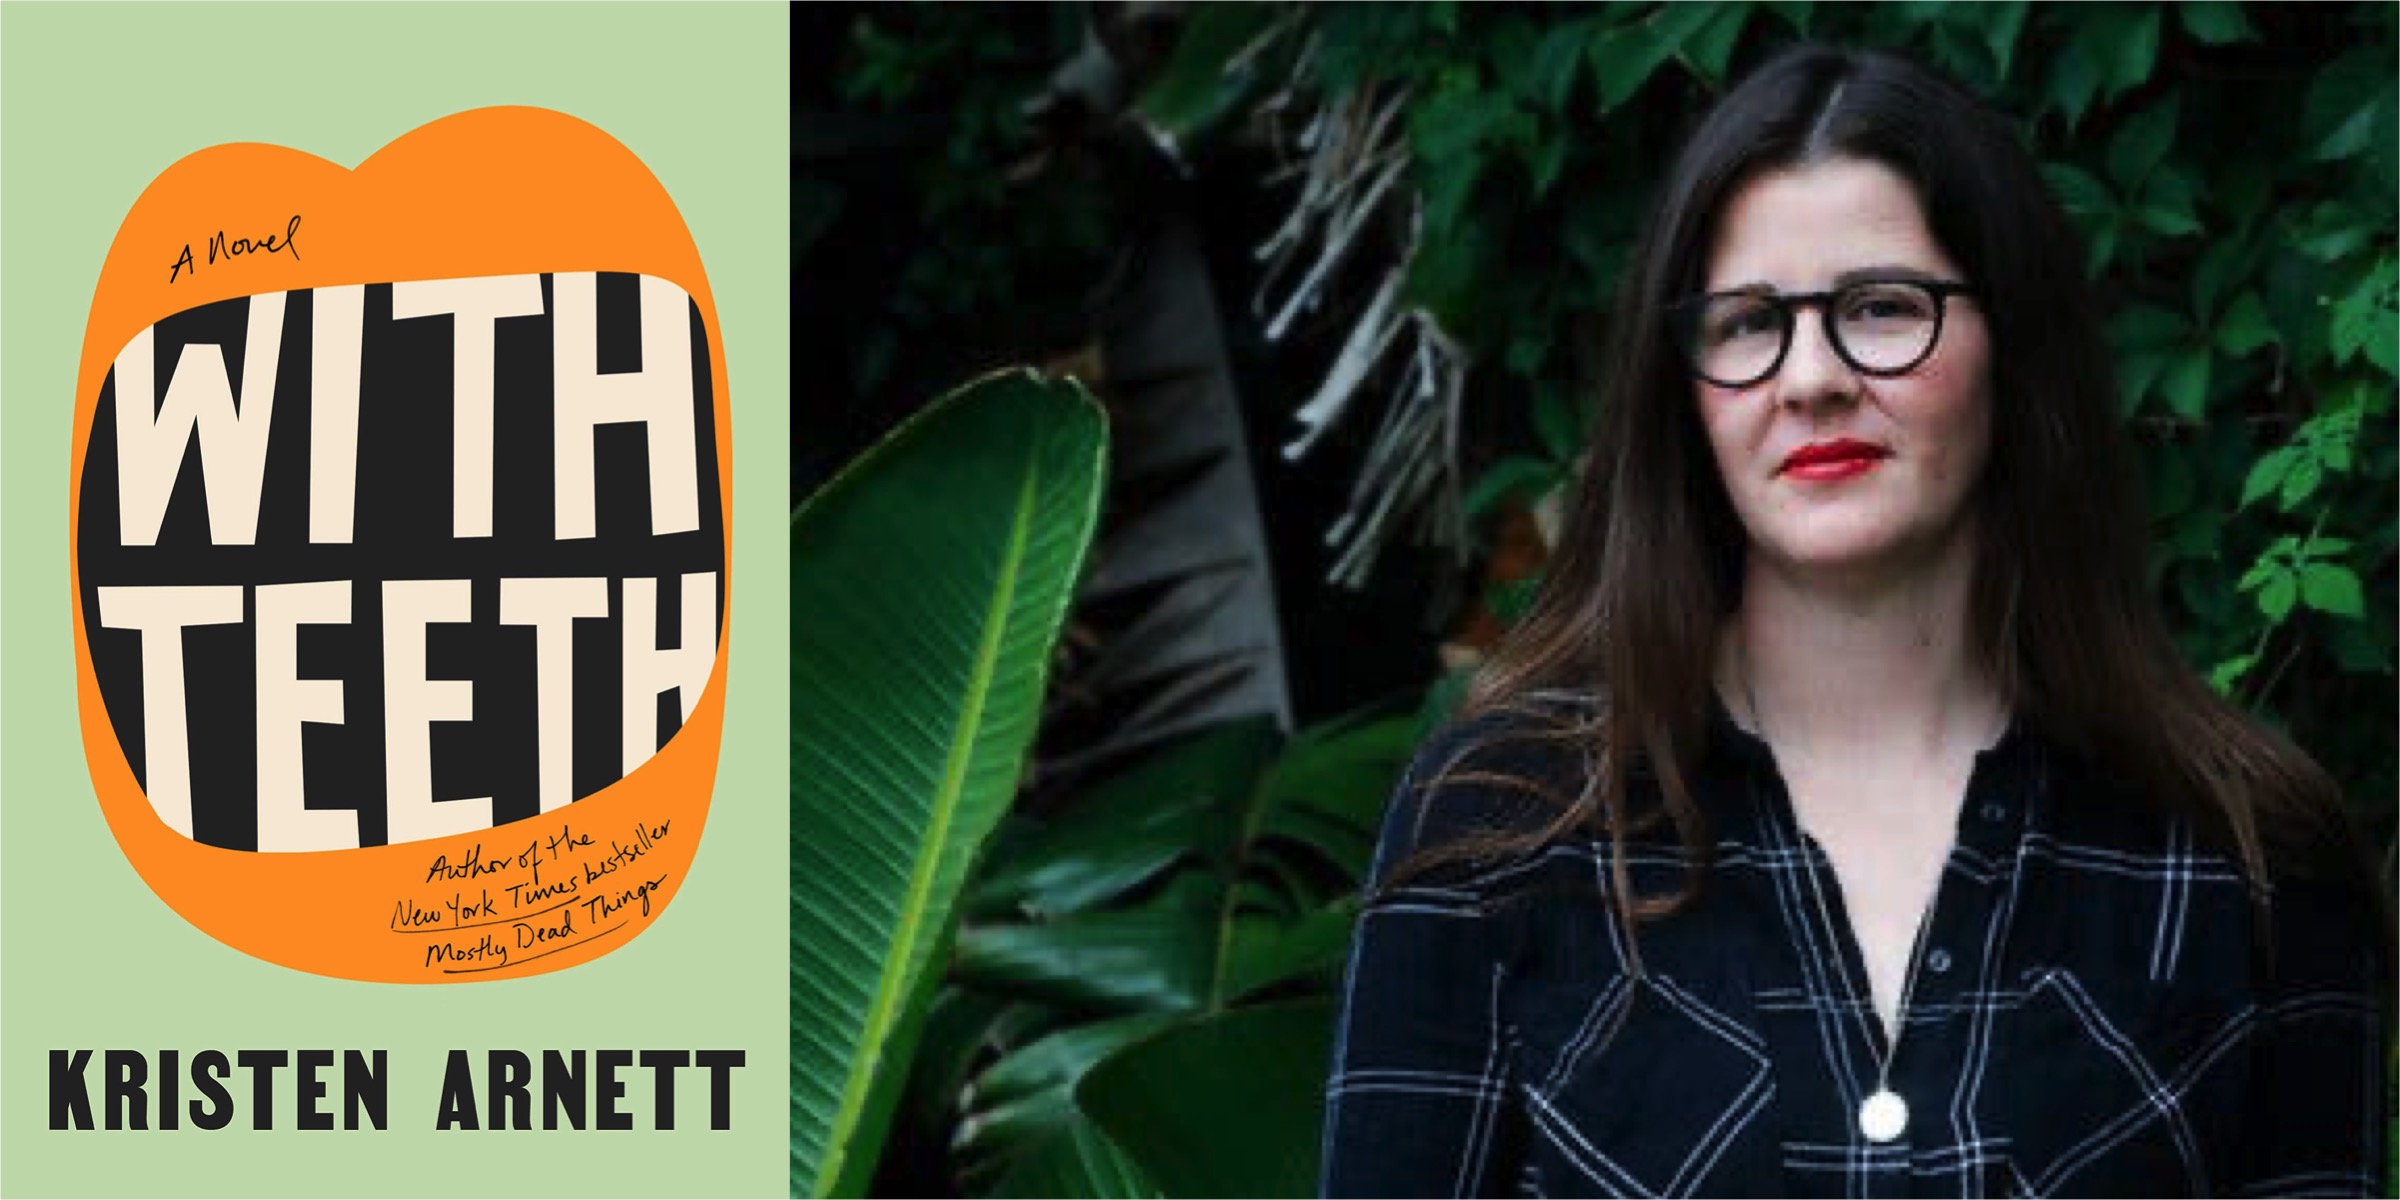 A composite of the cover of Kristen Arnett's WITH TEETH and a photo of the author posing outdoors next to a bird of paradise plant